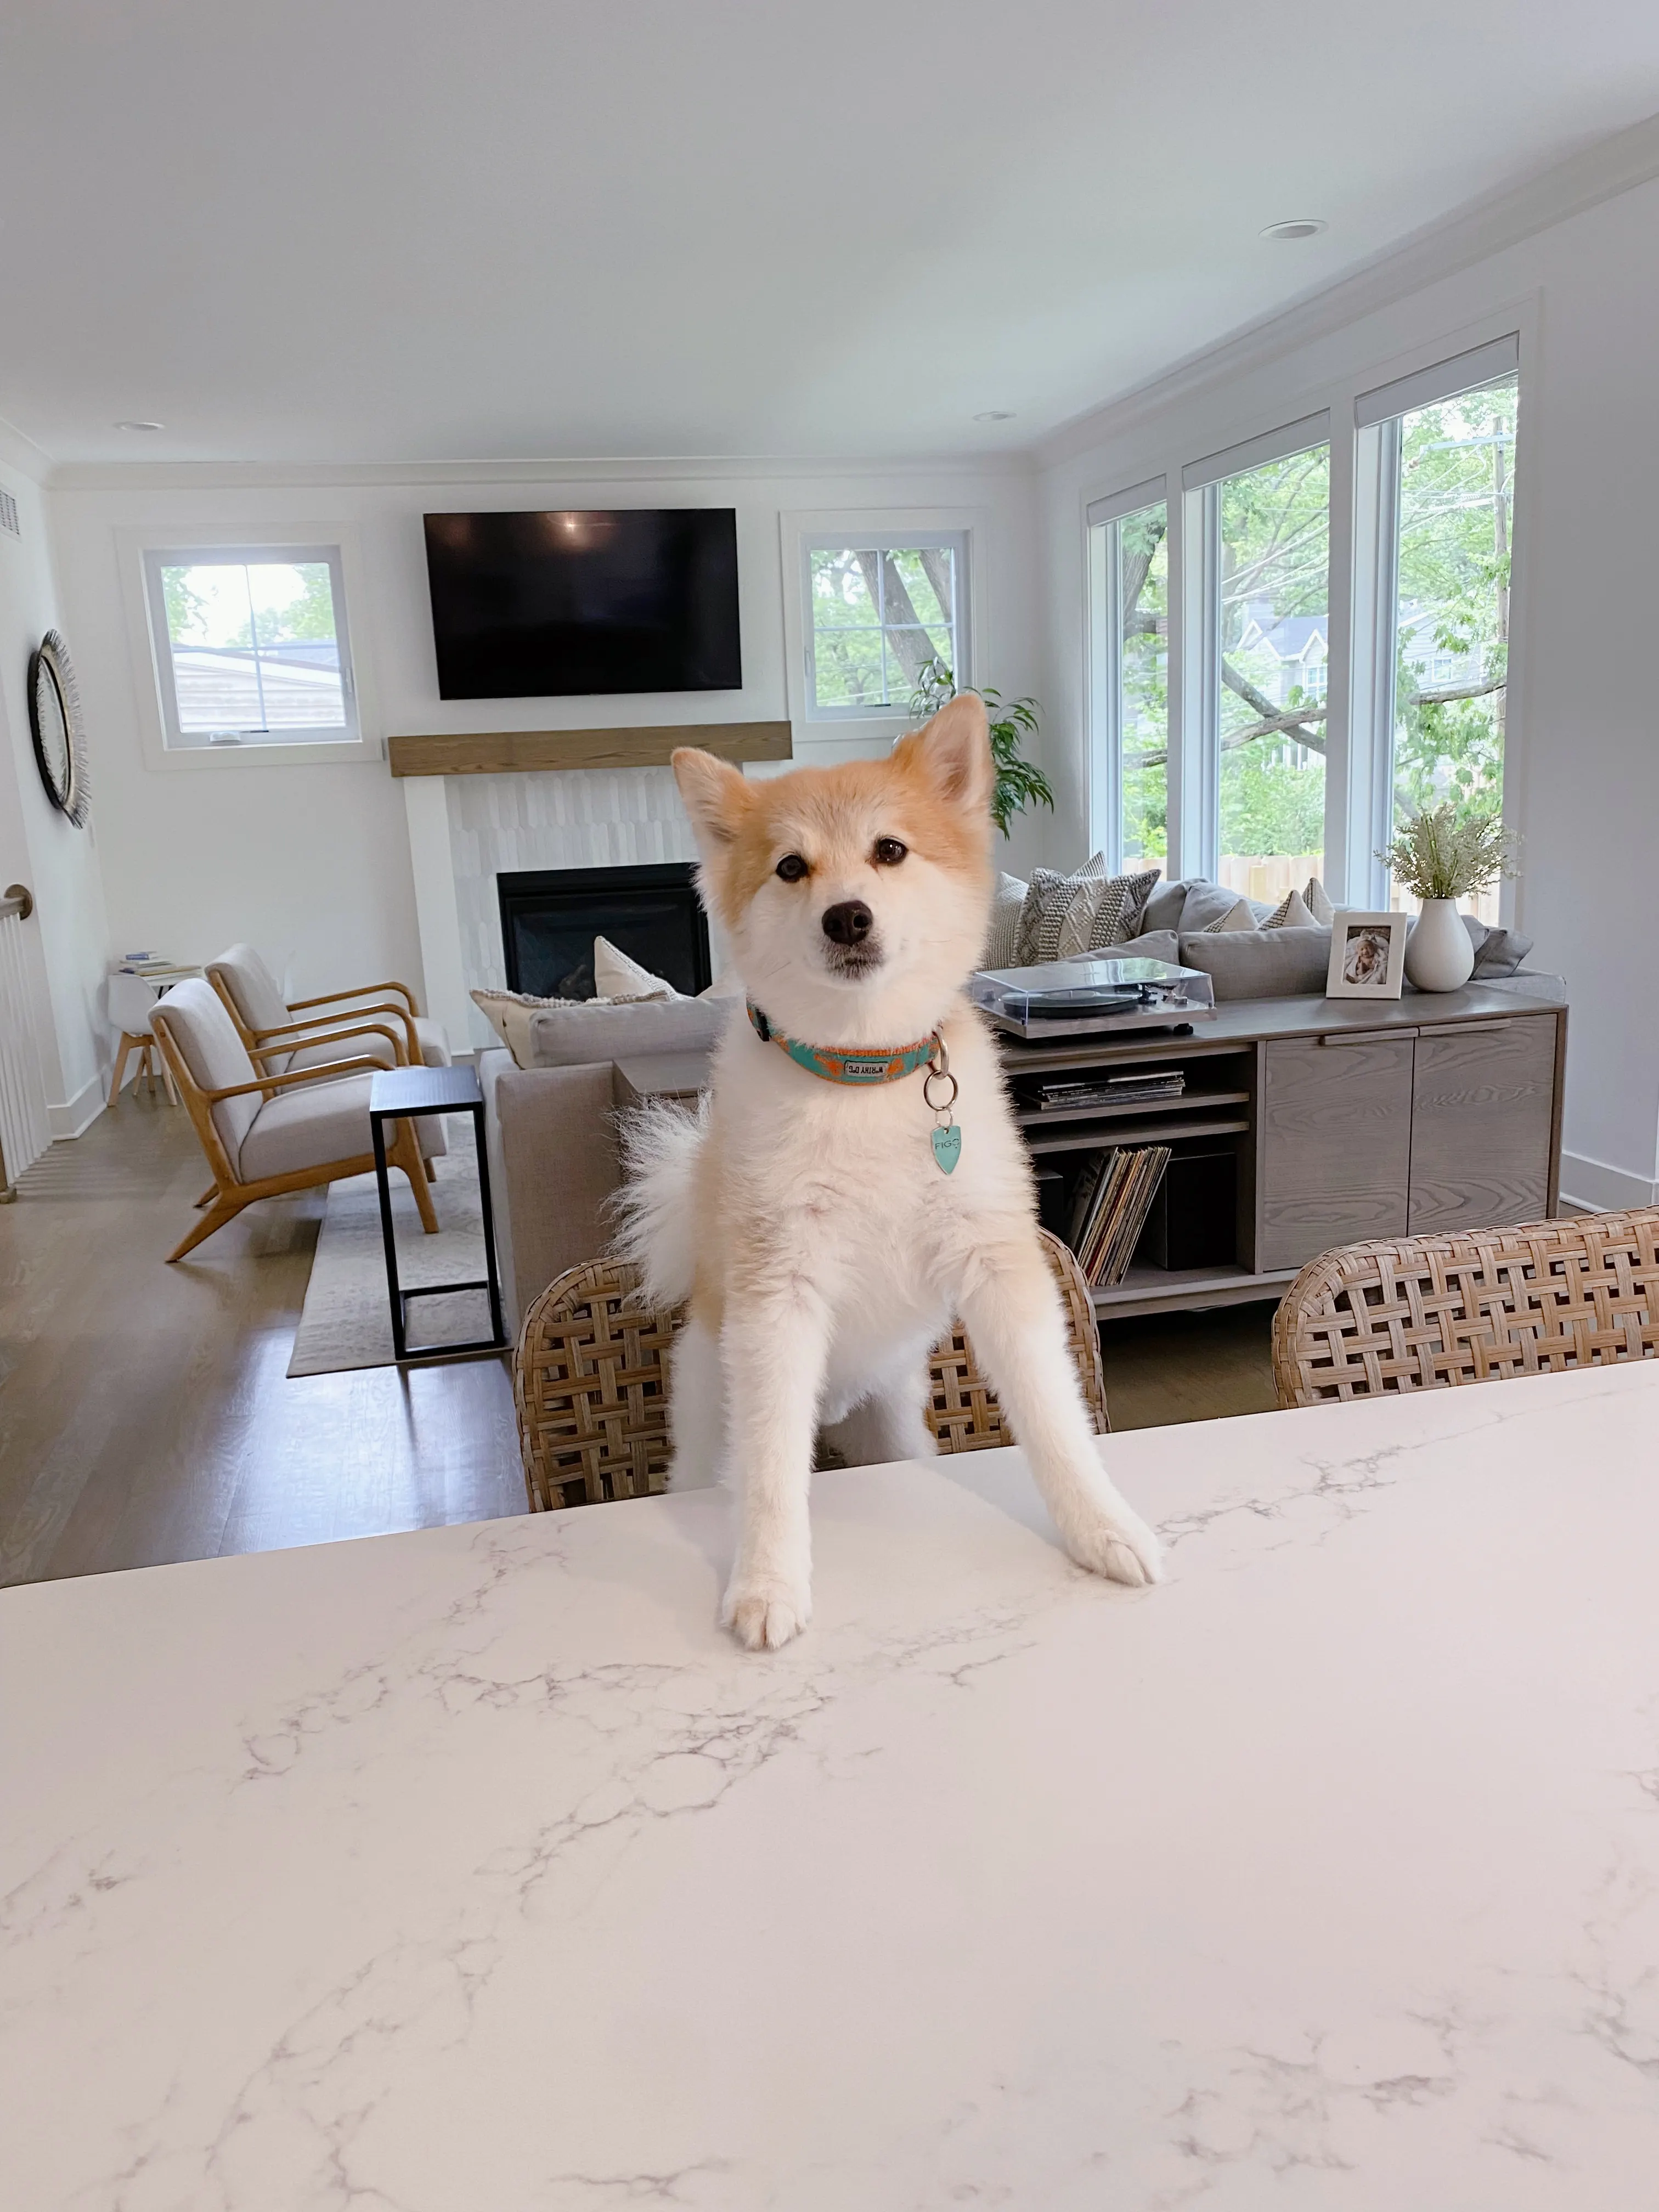 Dog with paws up on counter looking at camera